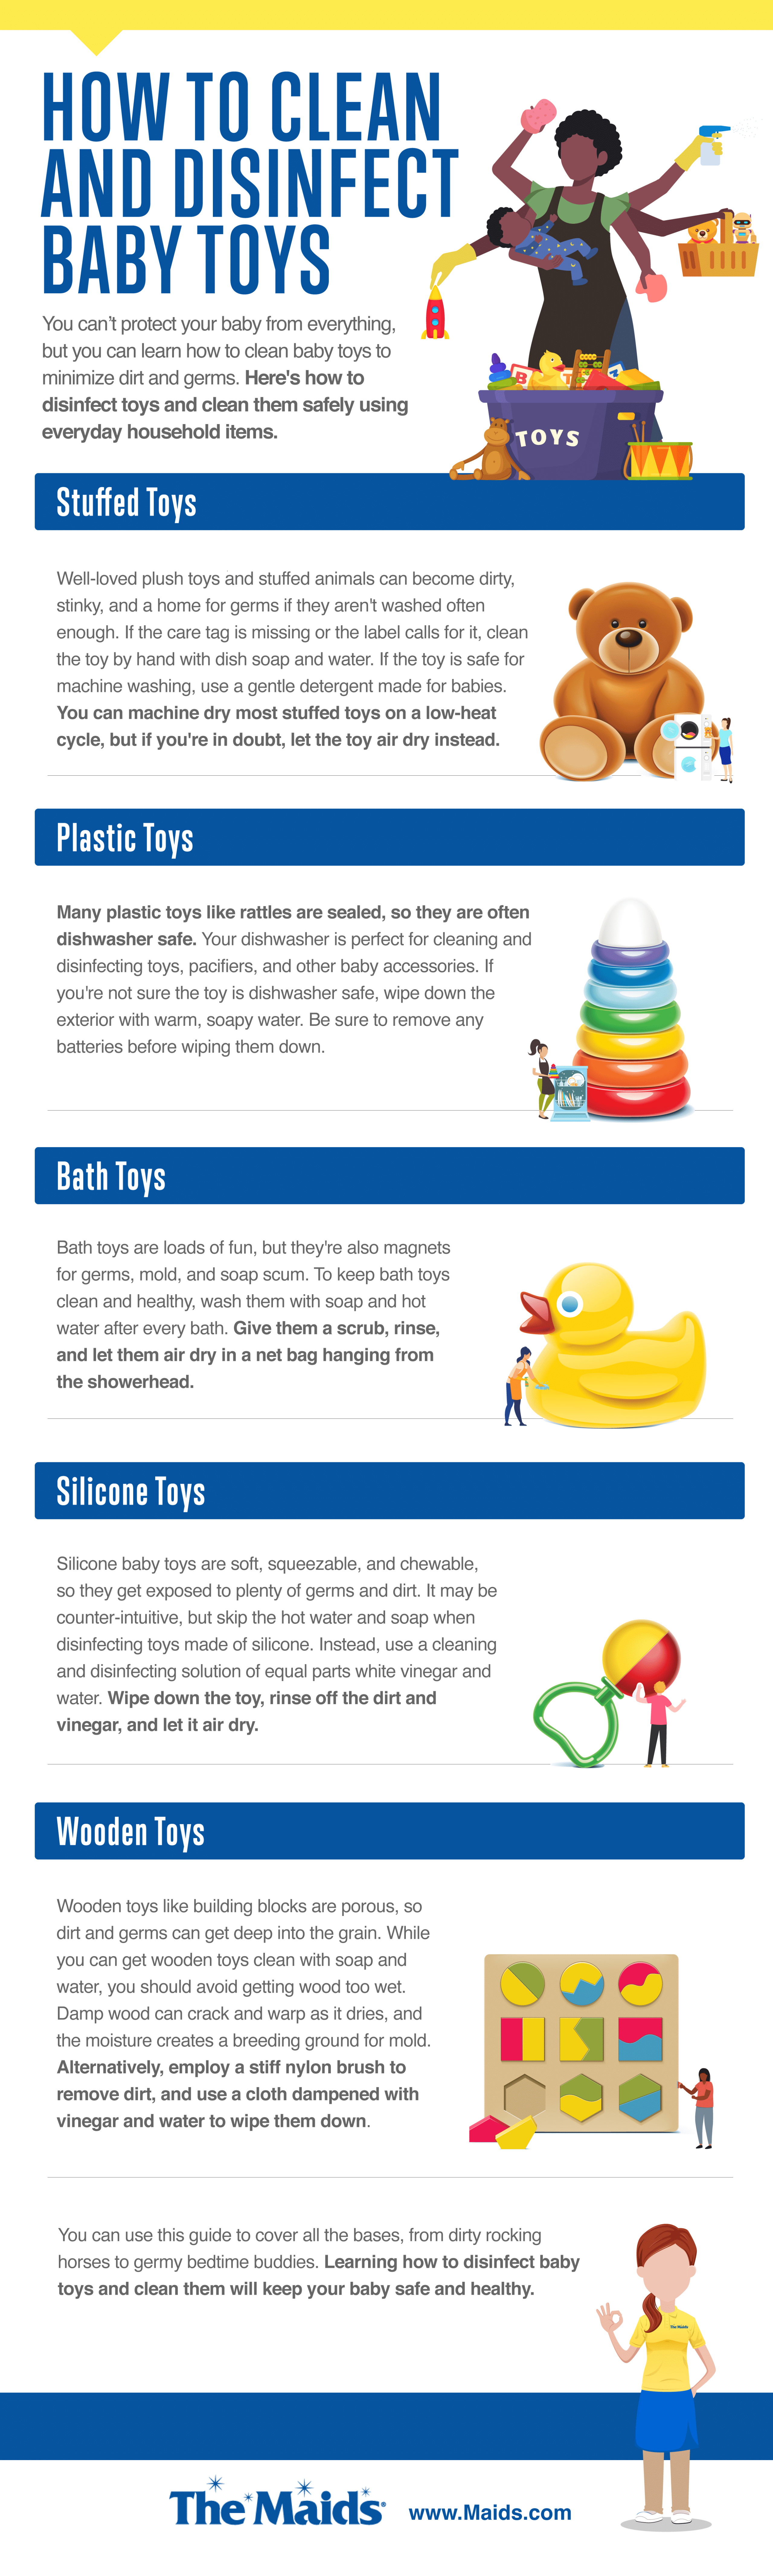 Infographic - How To Clean and Disinfect Baby Toys